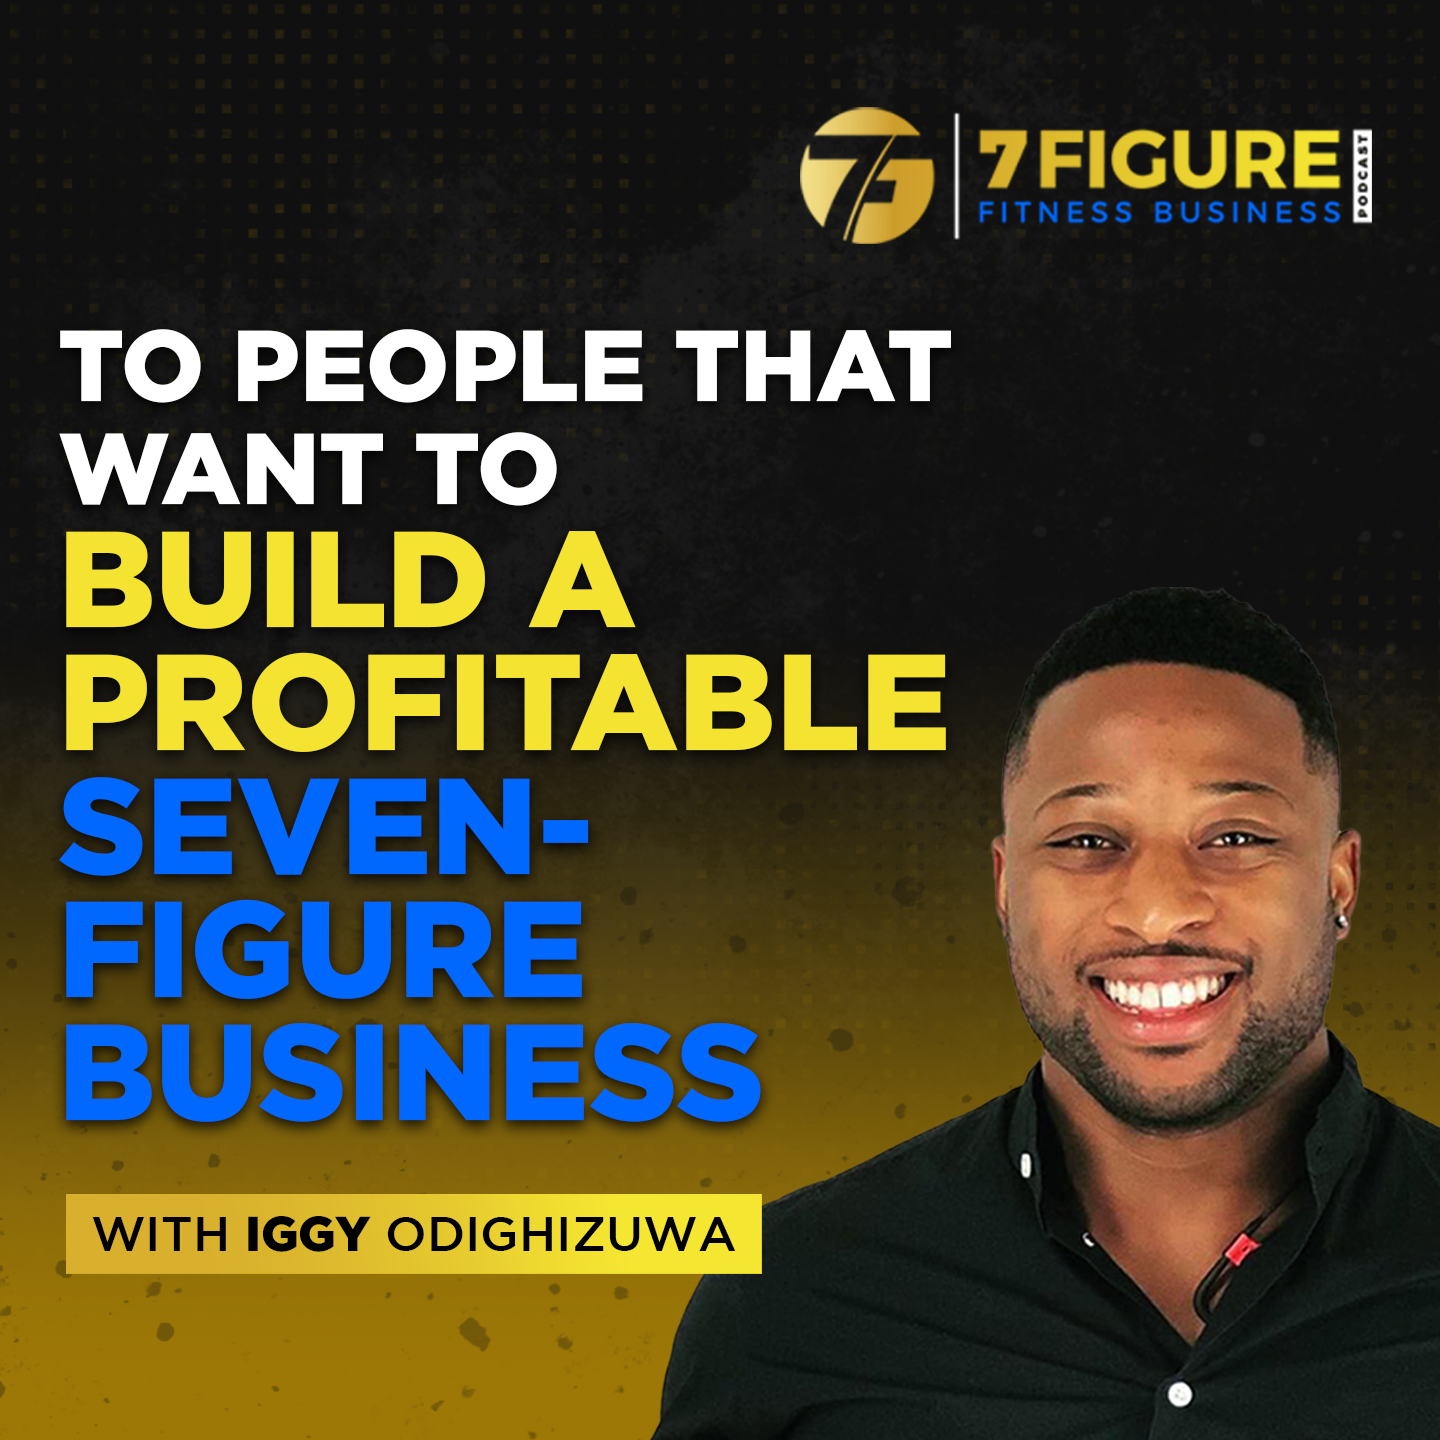 To People That Want To Build A Profitable Seven-Figure Business